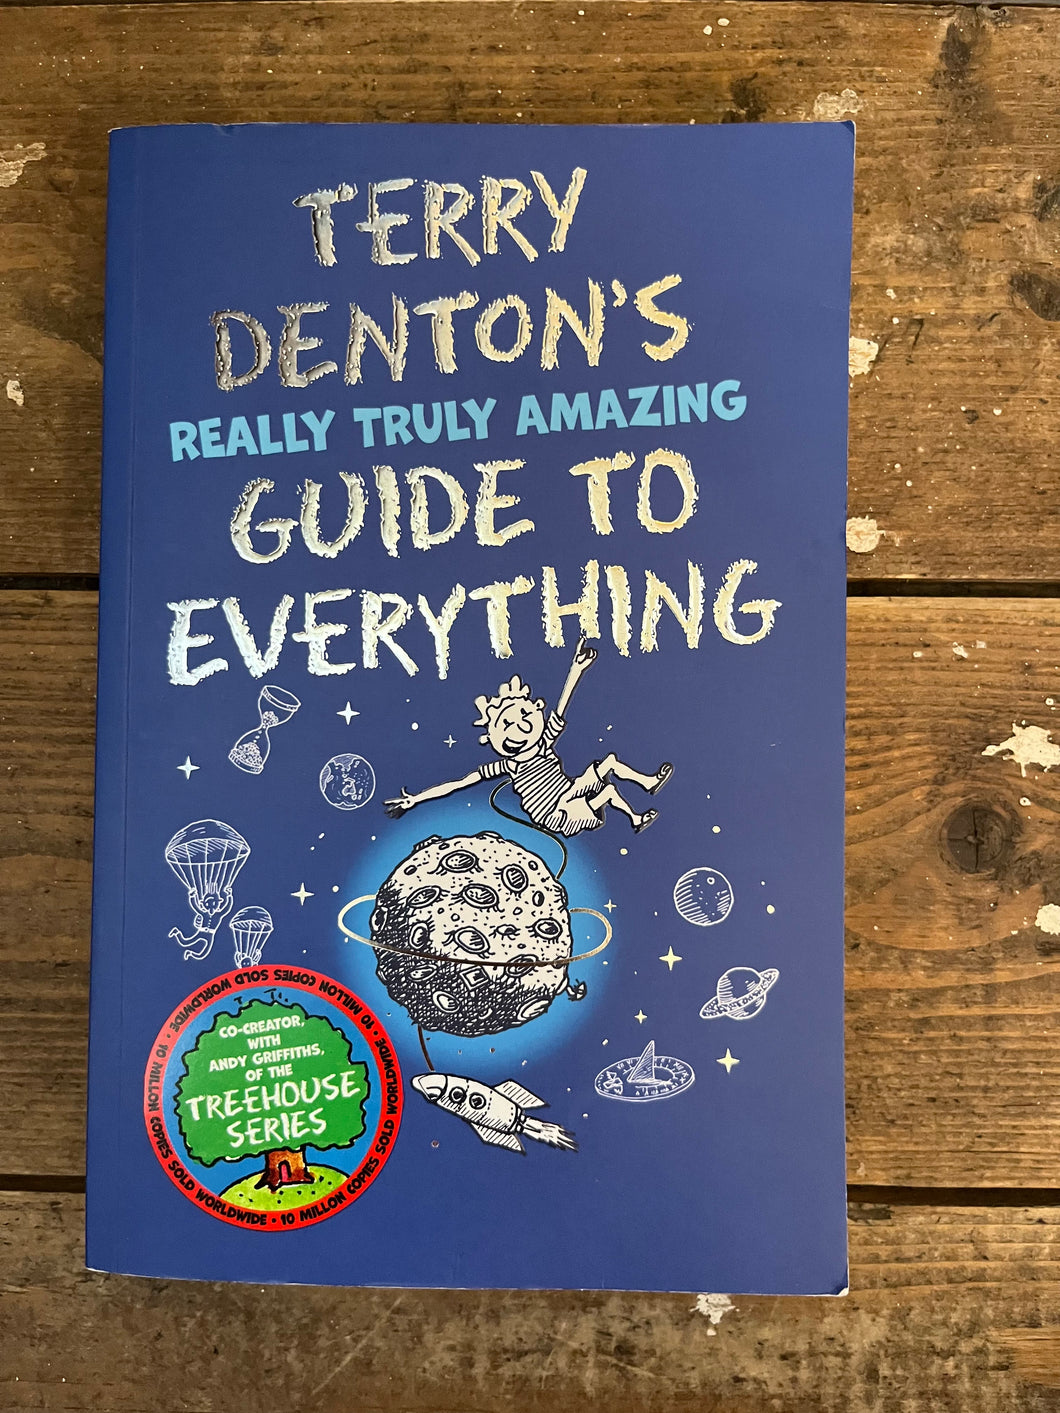 Terry Denton’s really truly amazing guide to everything